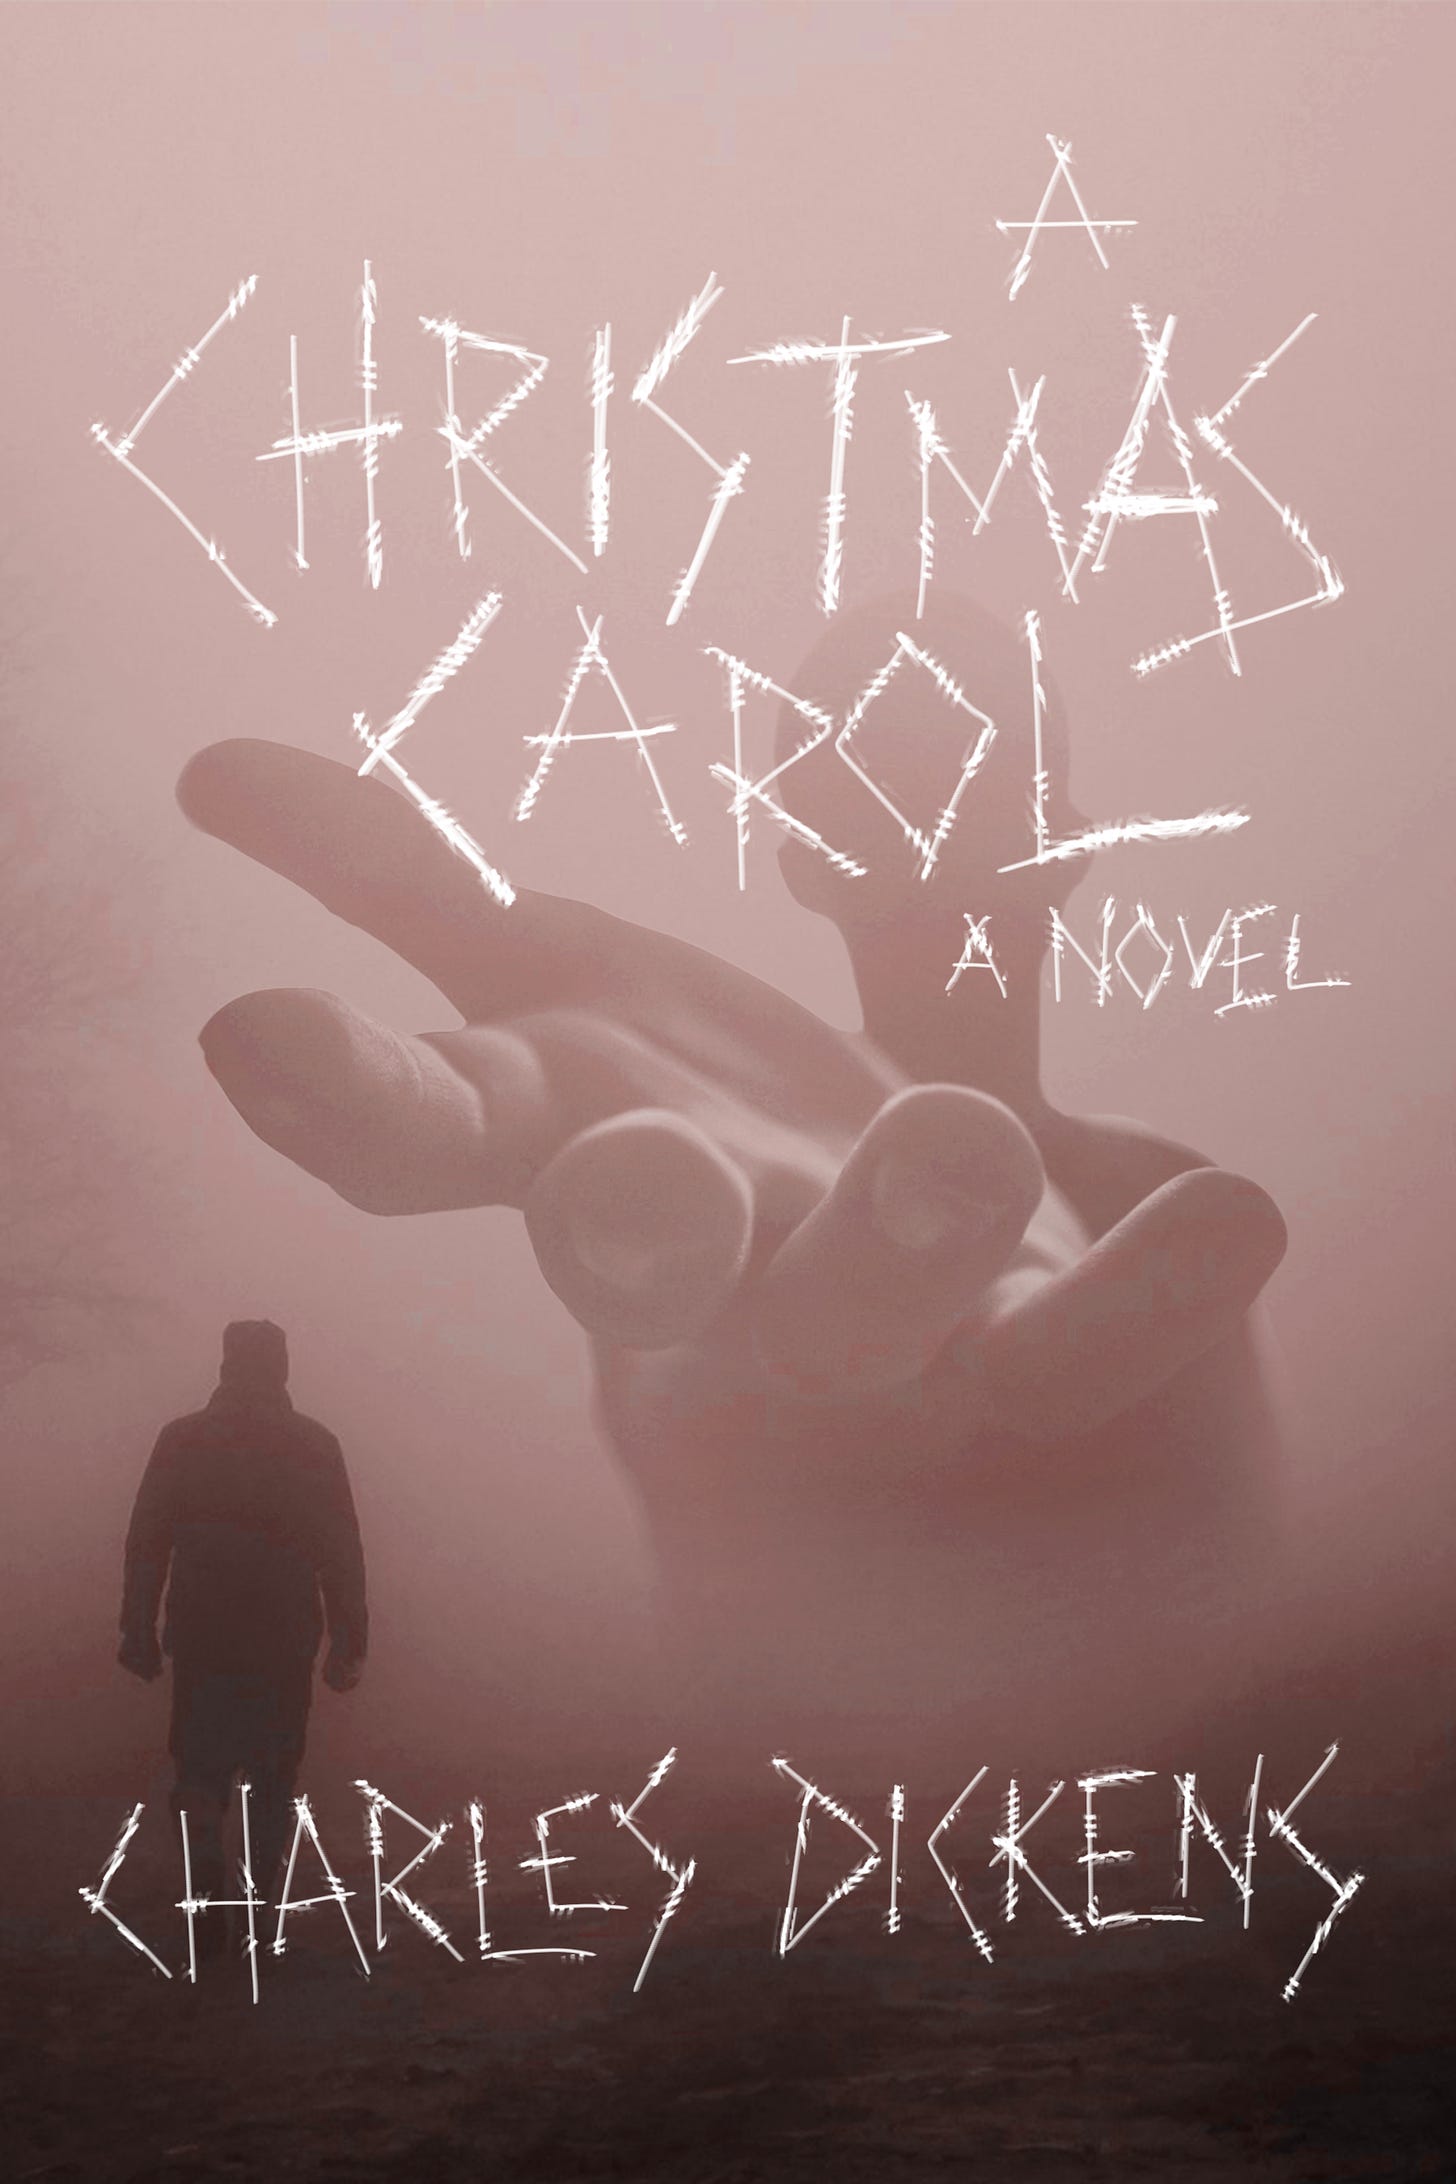 A Christmas Carol: A Novel by Charles Dickens. A giant ghostly man rises out of the mists, his hand outstretched, while a regular sized silhouetted man stands in front of him. The text looks like it's scratched out.